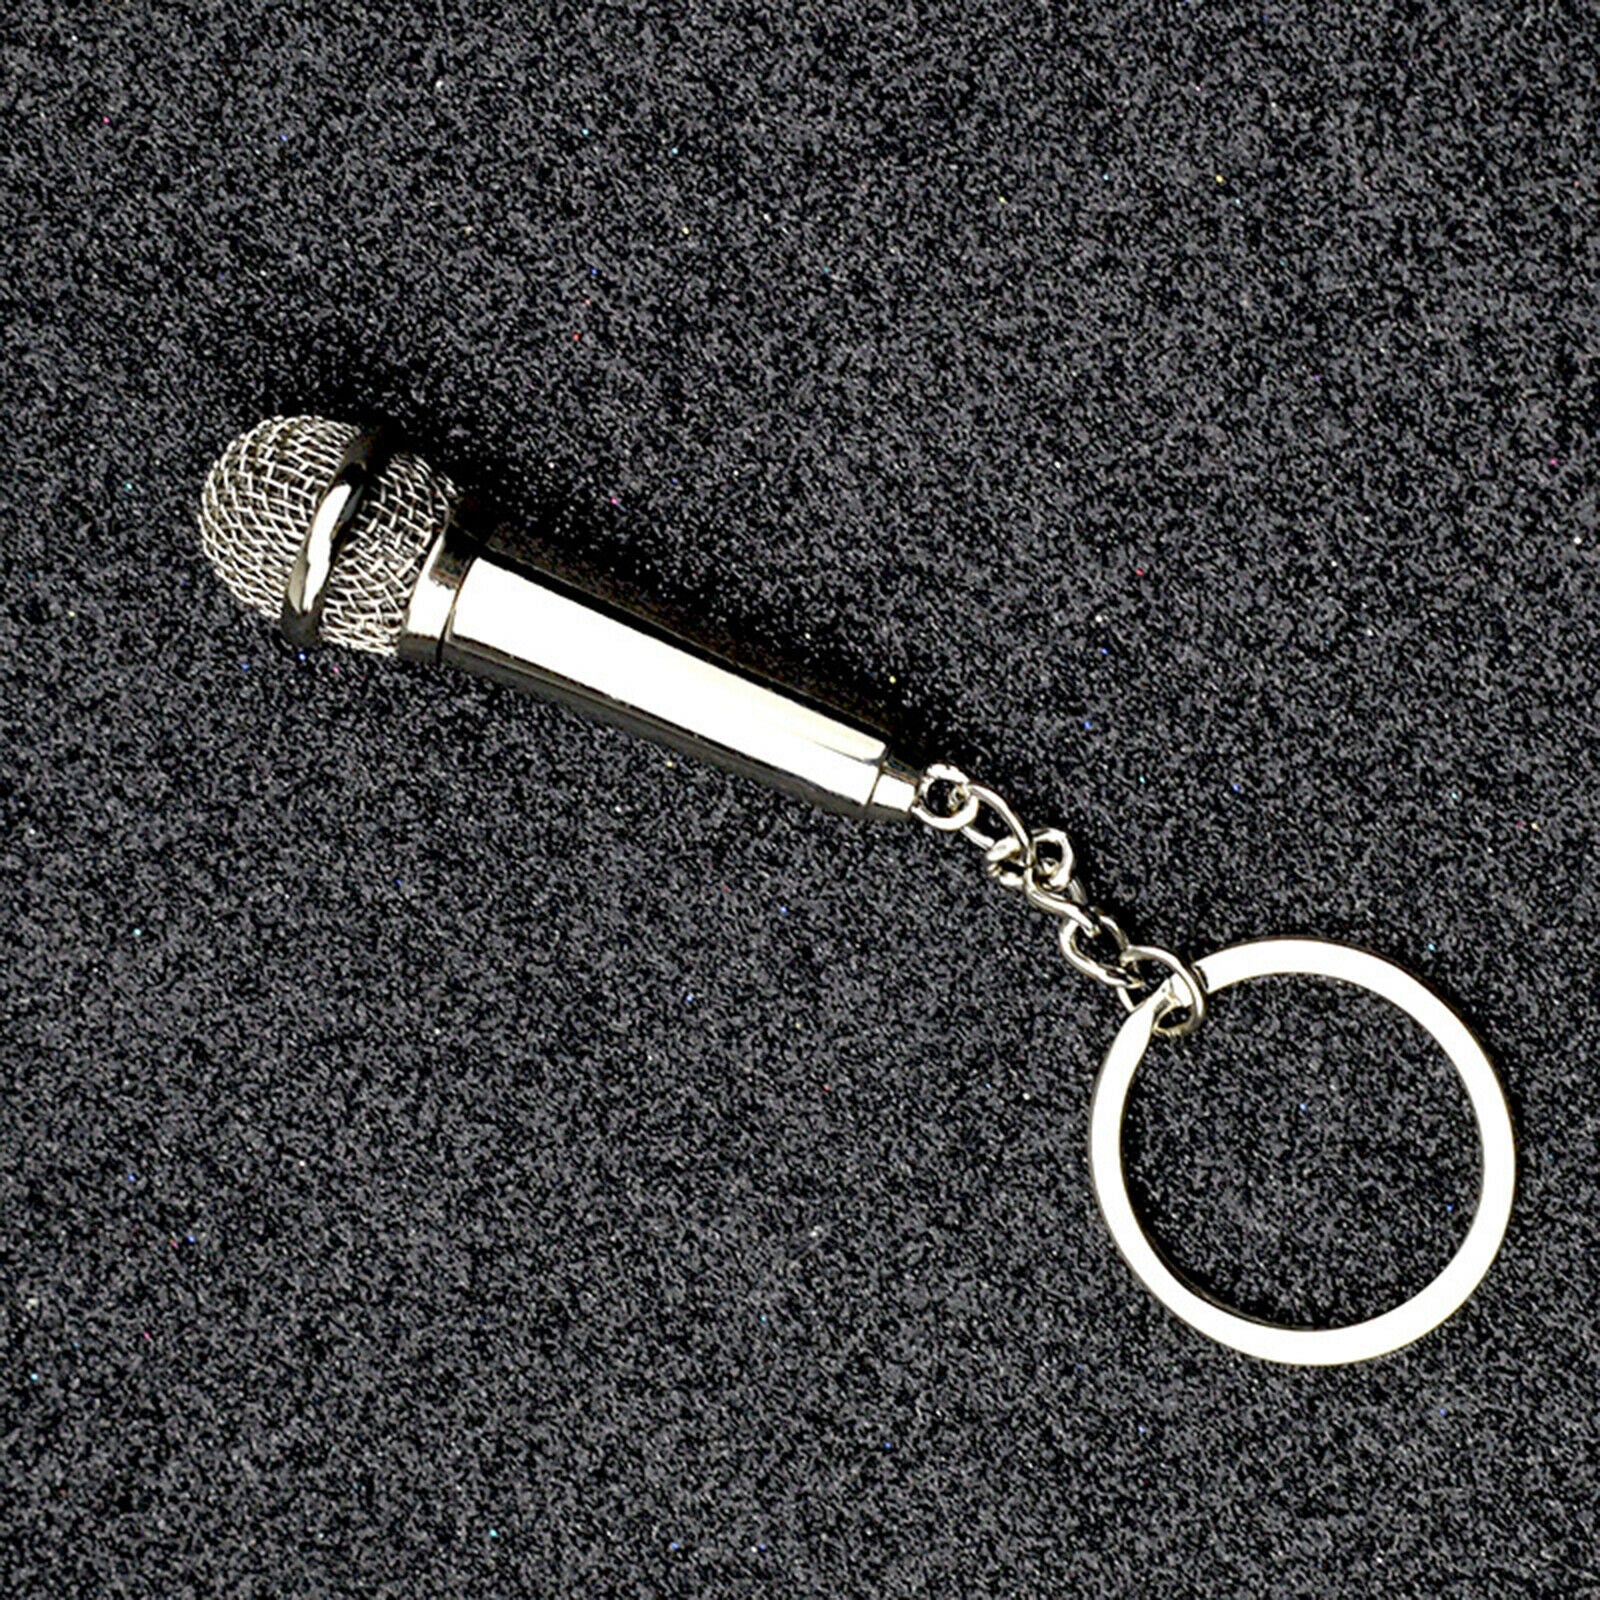 Fashion Cute Punk Music Microphone Keychain Hanging for Bag Key Ring Gift